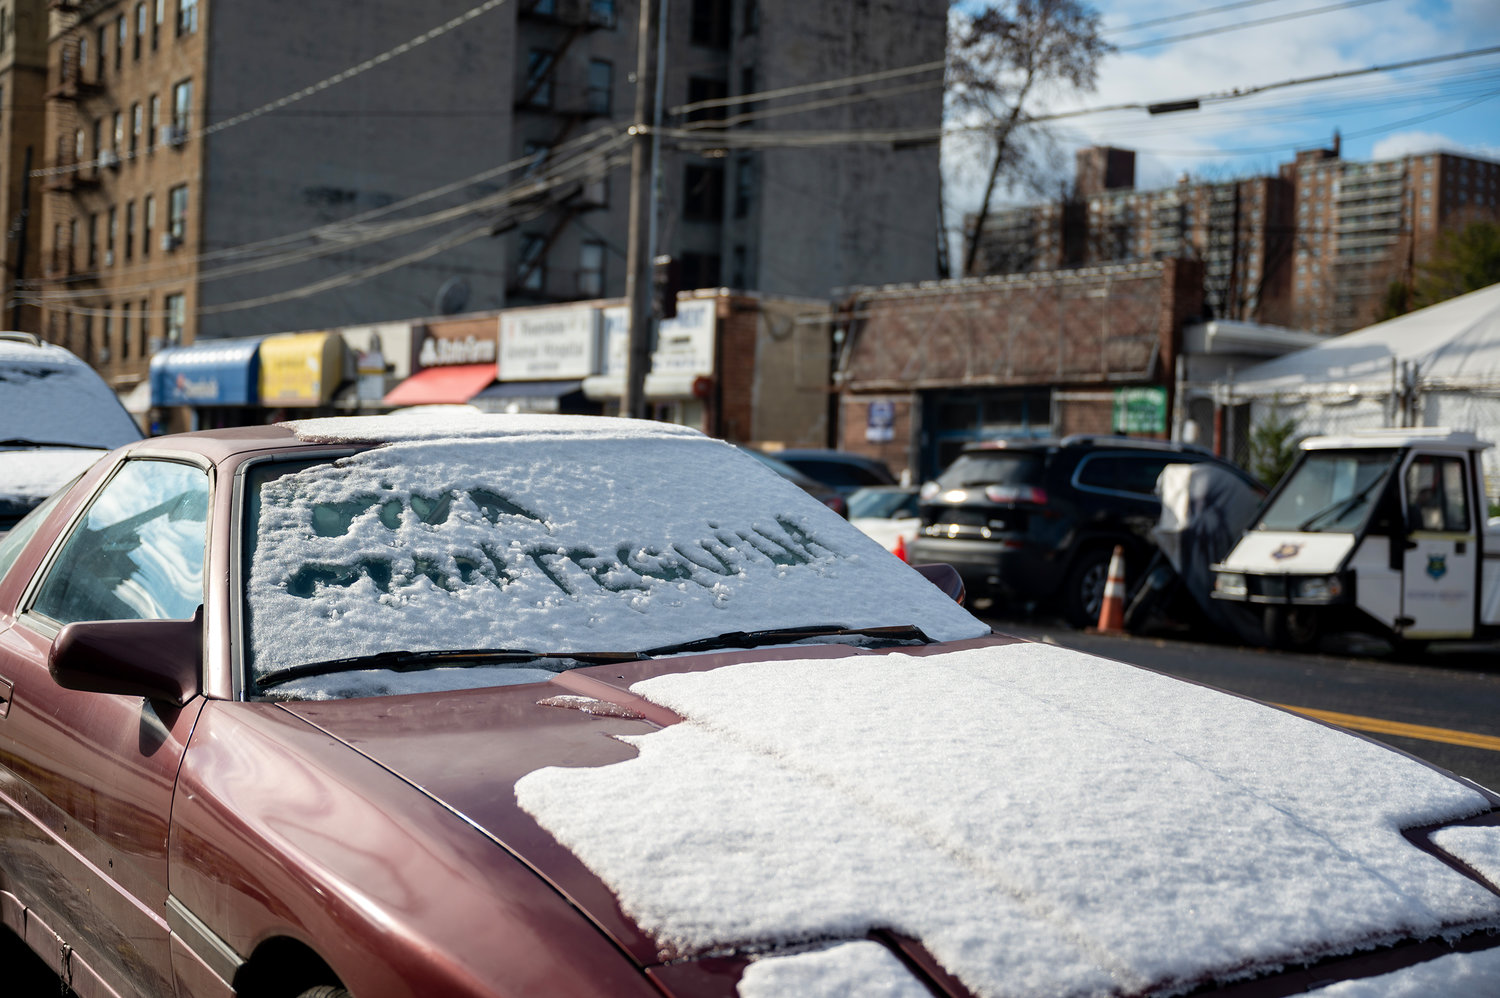 The words "Viva Mantequilla" written in snow on a car parked in Kingsbridge on Dec. 12, 2022.